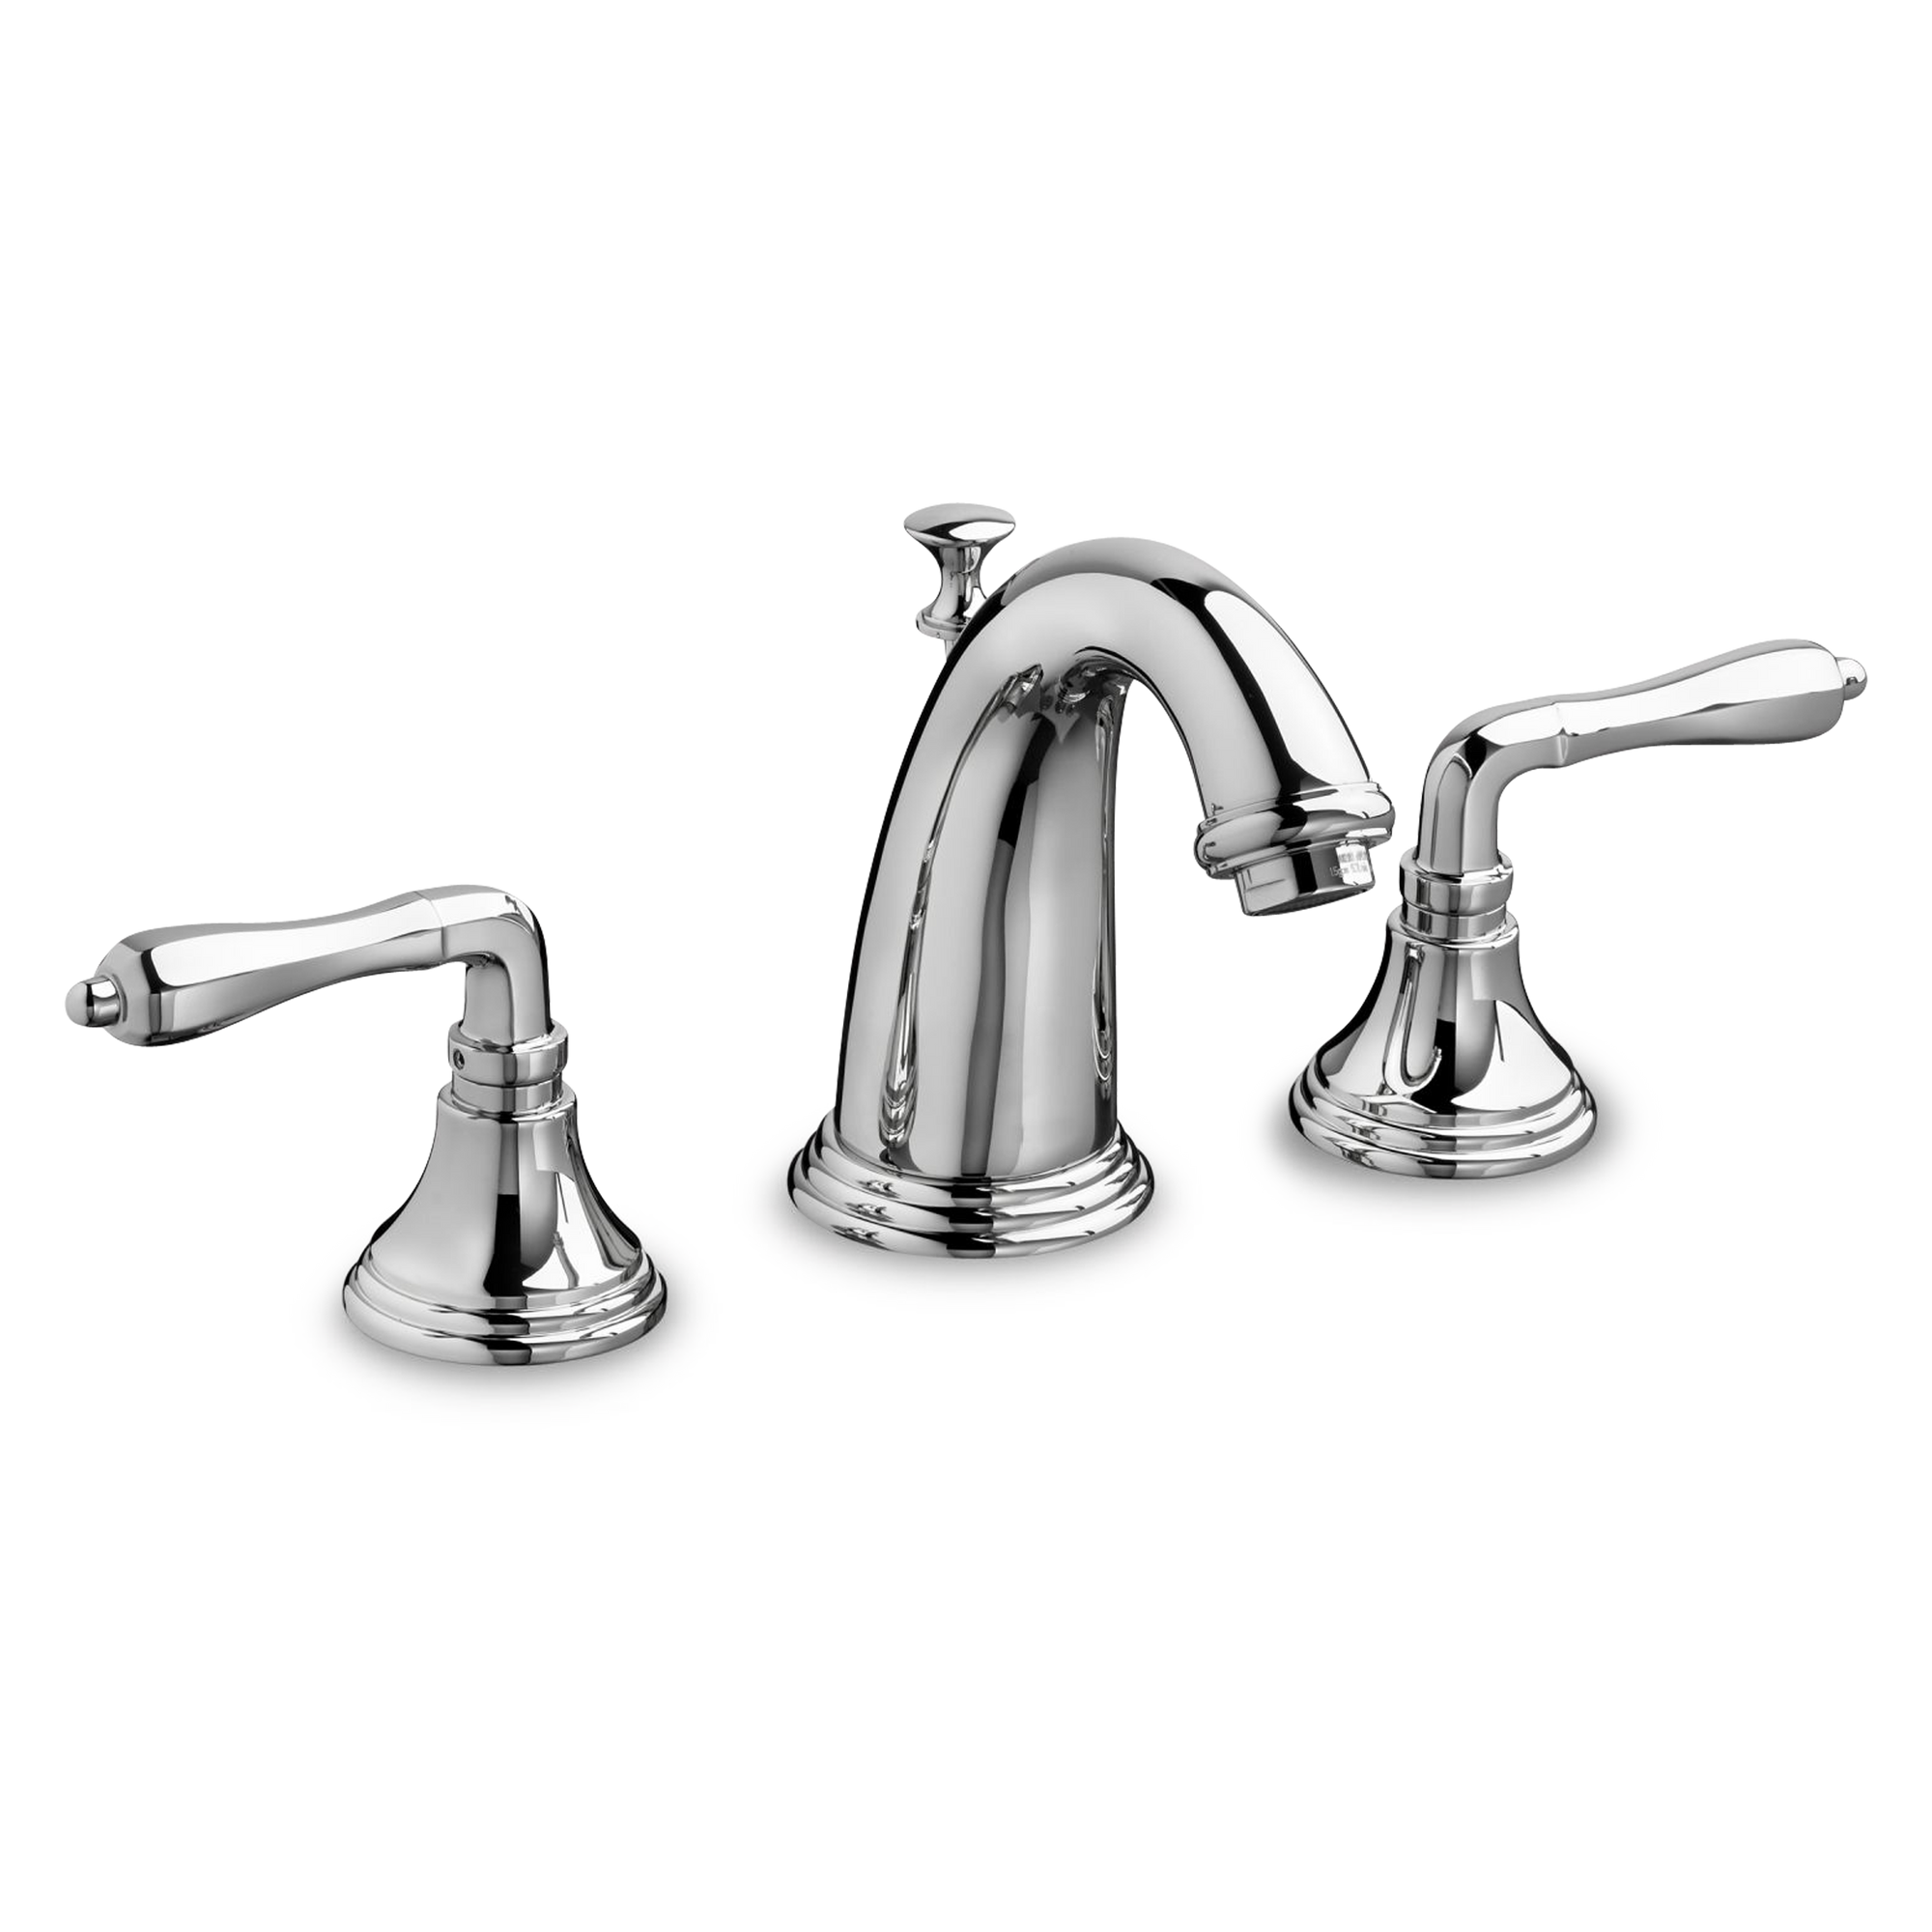 The Ashbee L Faucet  stunning and classically inspired widespread basin faucet with two metal lever handles.